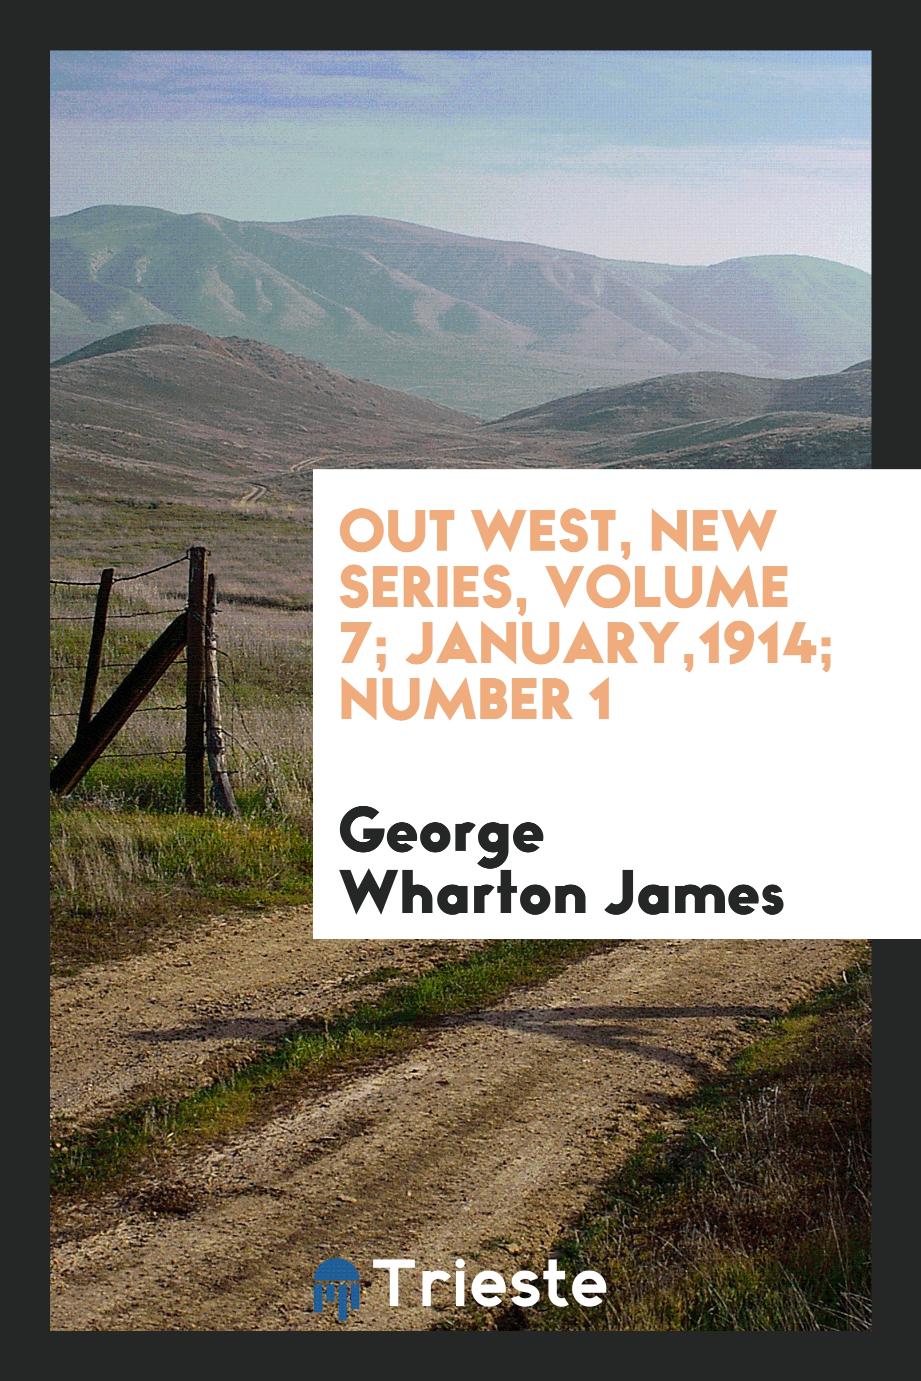 Out west, New Series, Volume 7; January,1914; Number 1